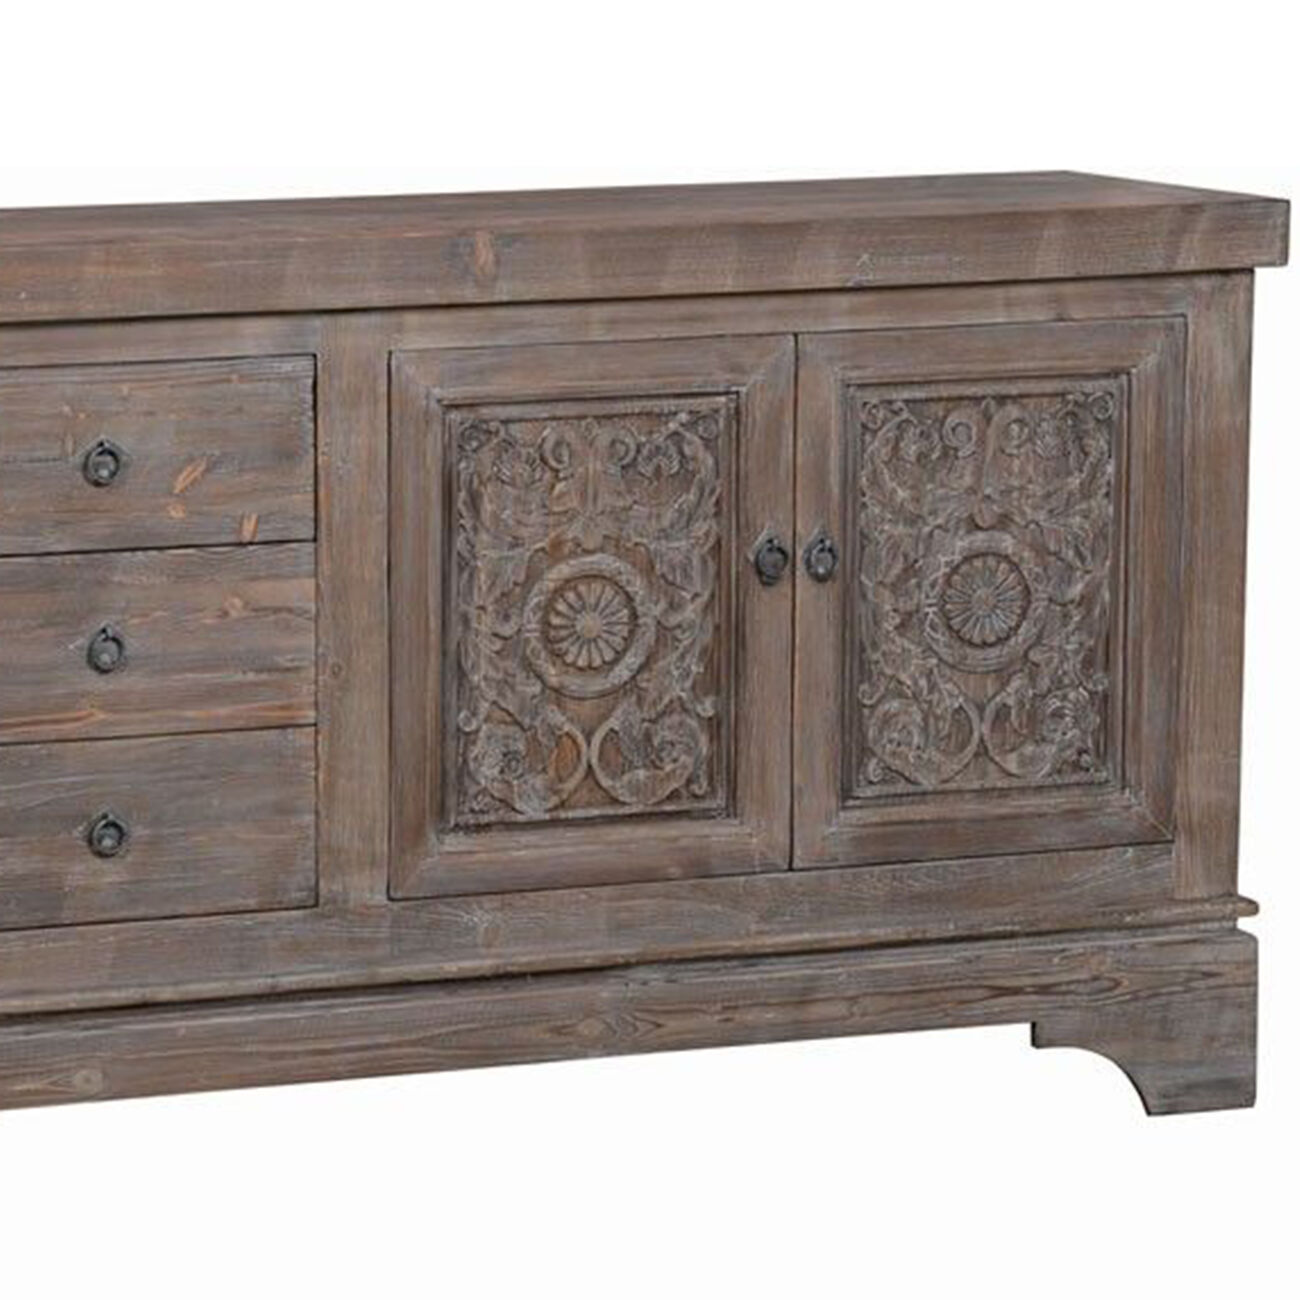 Engraved Reclaimed Wood Sideboard with 3 Drawers and 4 Doors, Brown